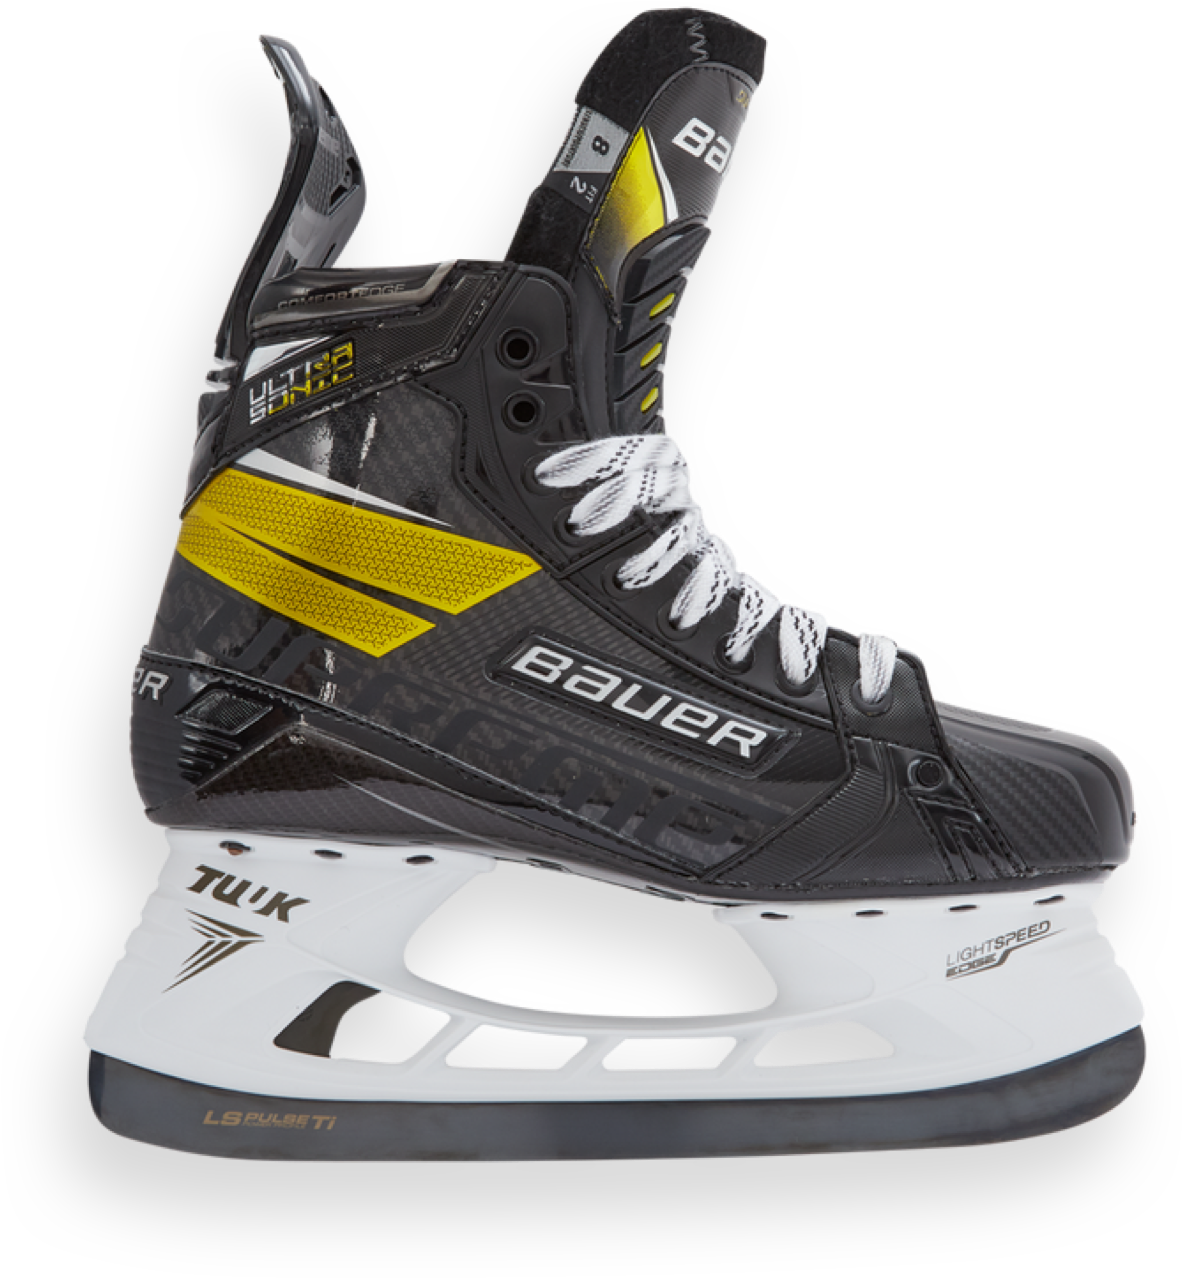 BAUER Official Site | Hockey Equipment for Players and Goalies